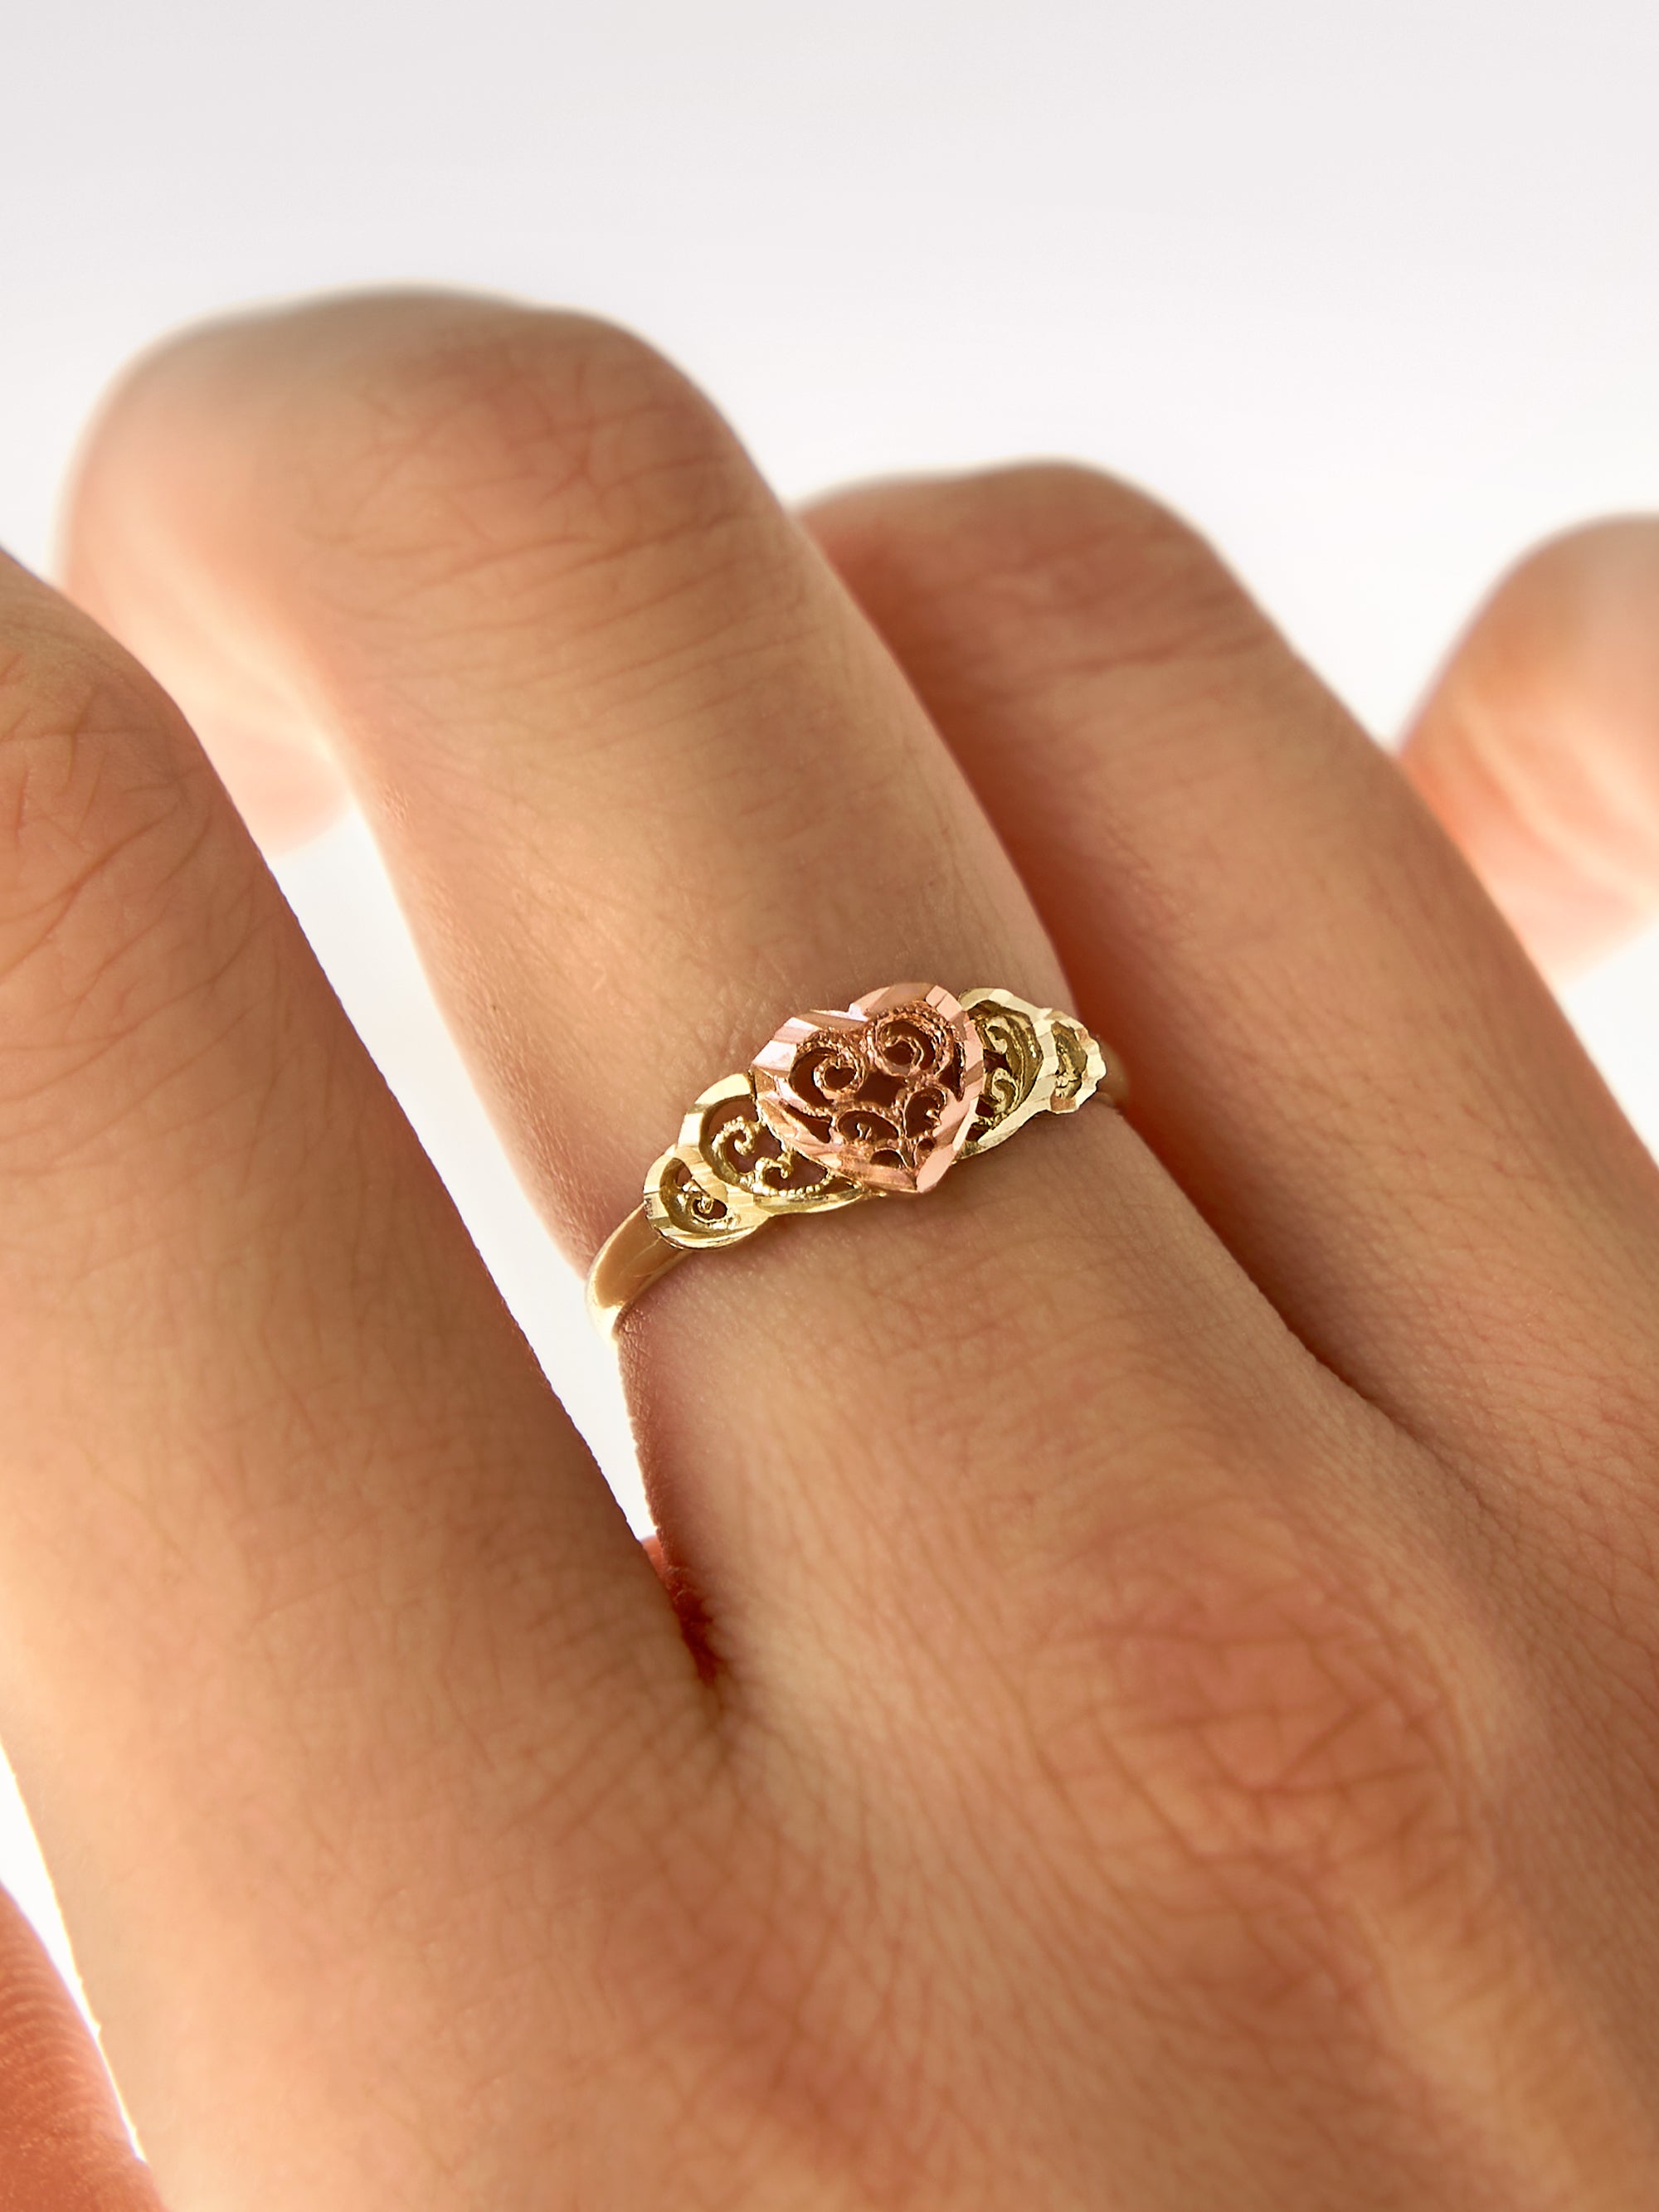 THE LACY HEART RING